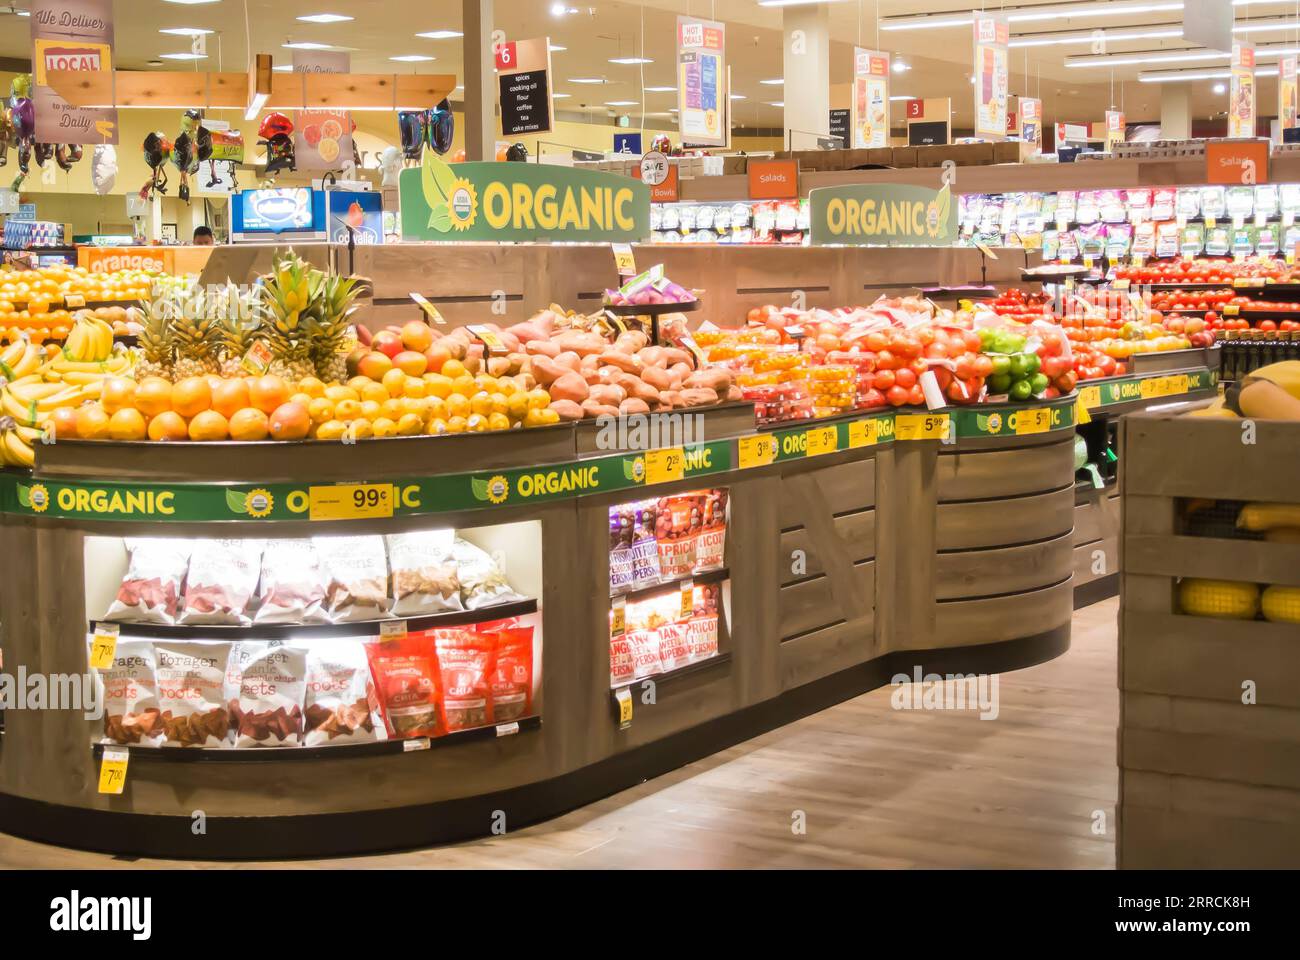 View of Food Aisles in American Supermarket Stock Photo